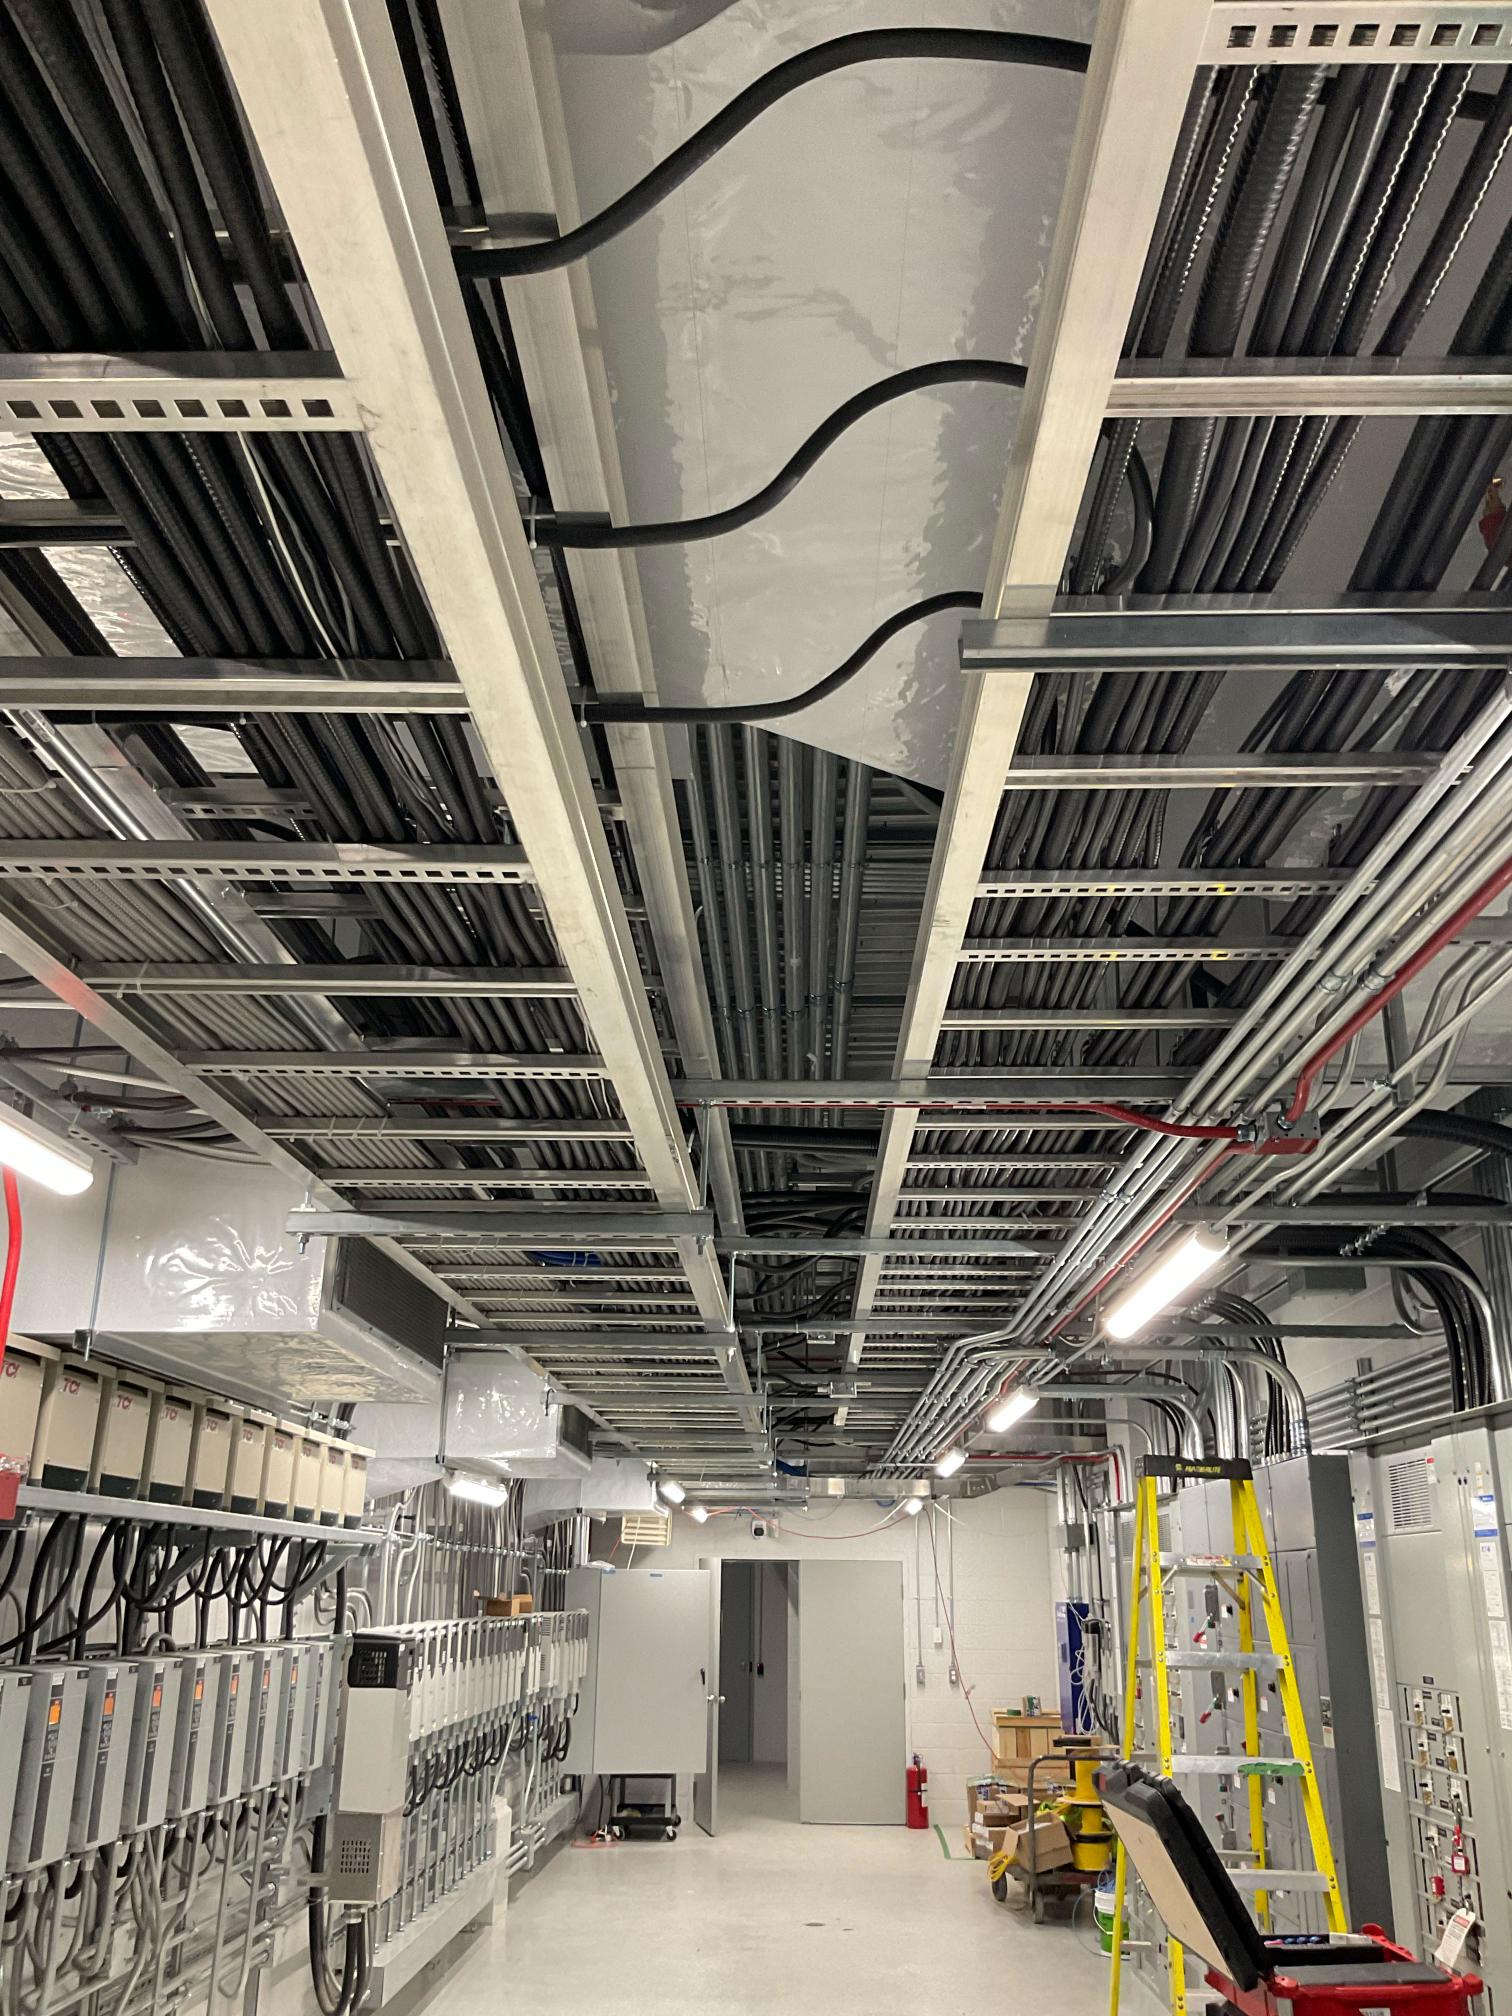 a ceiling with wires and cables